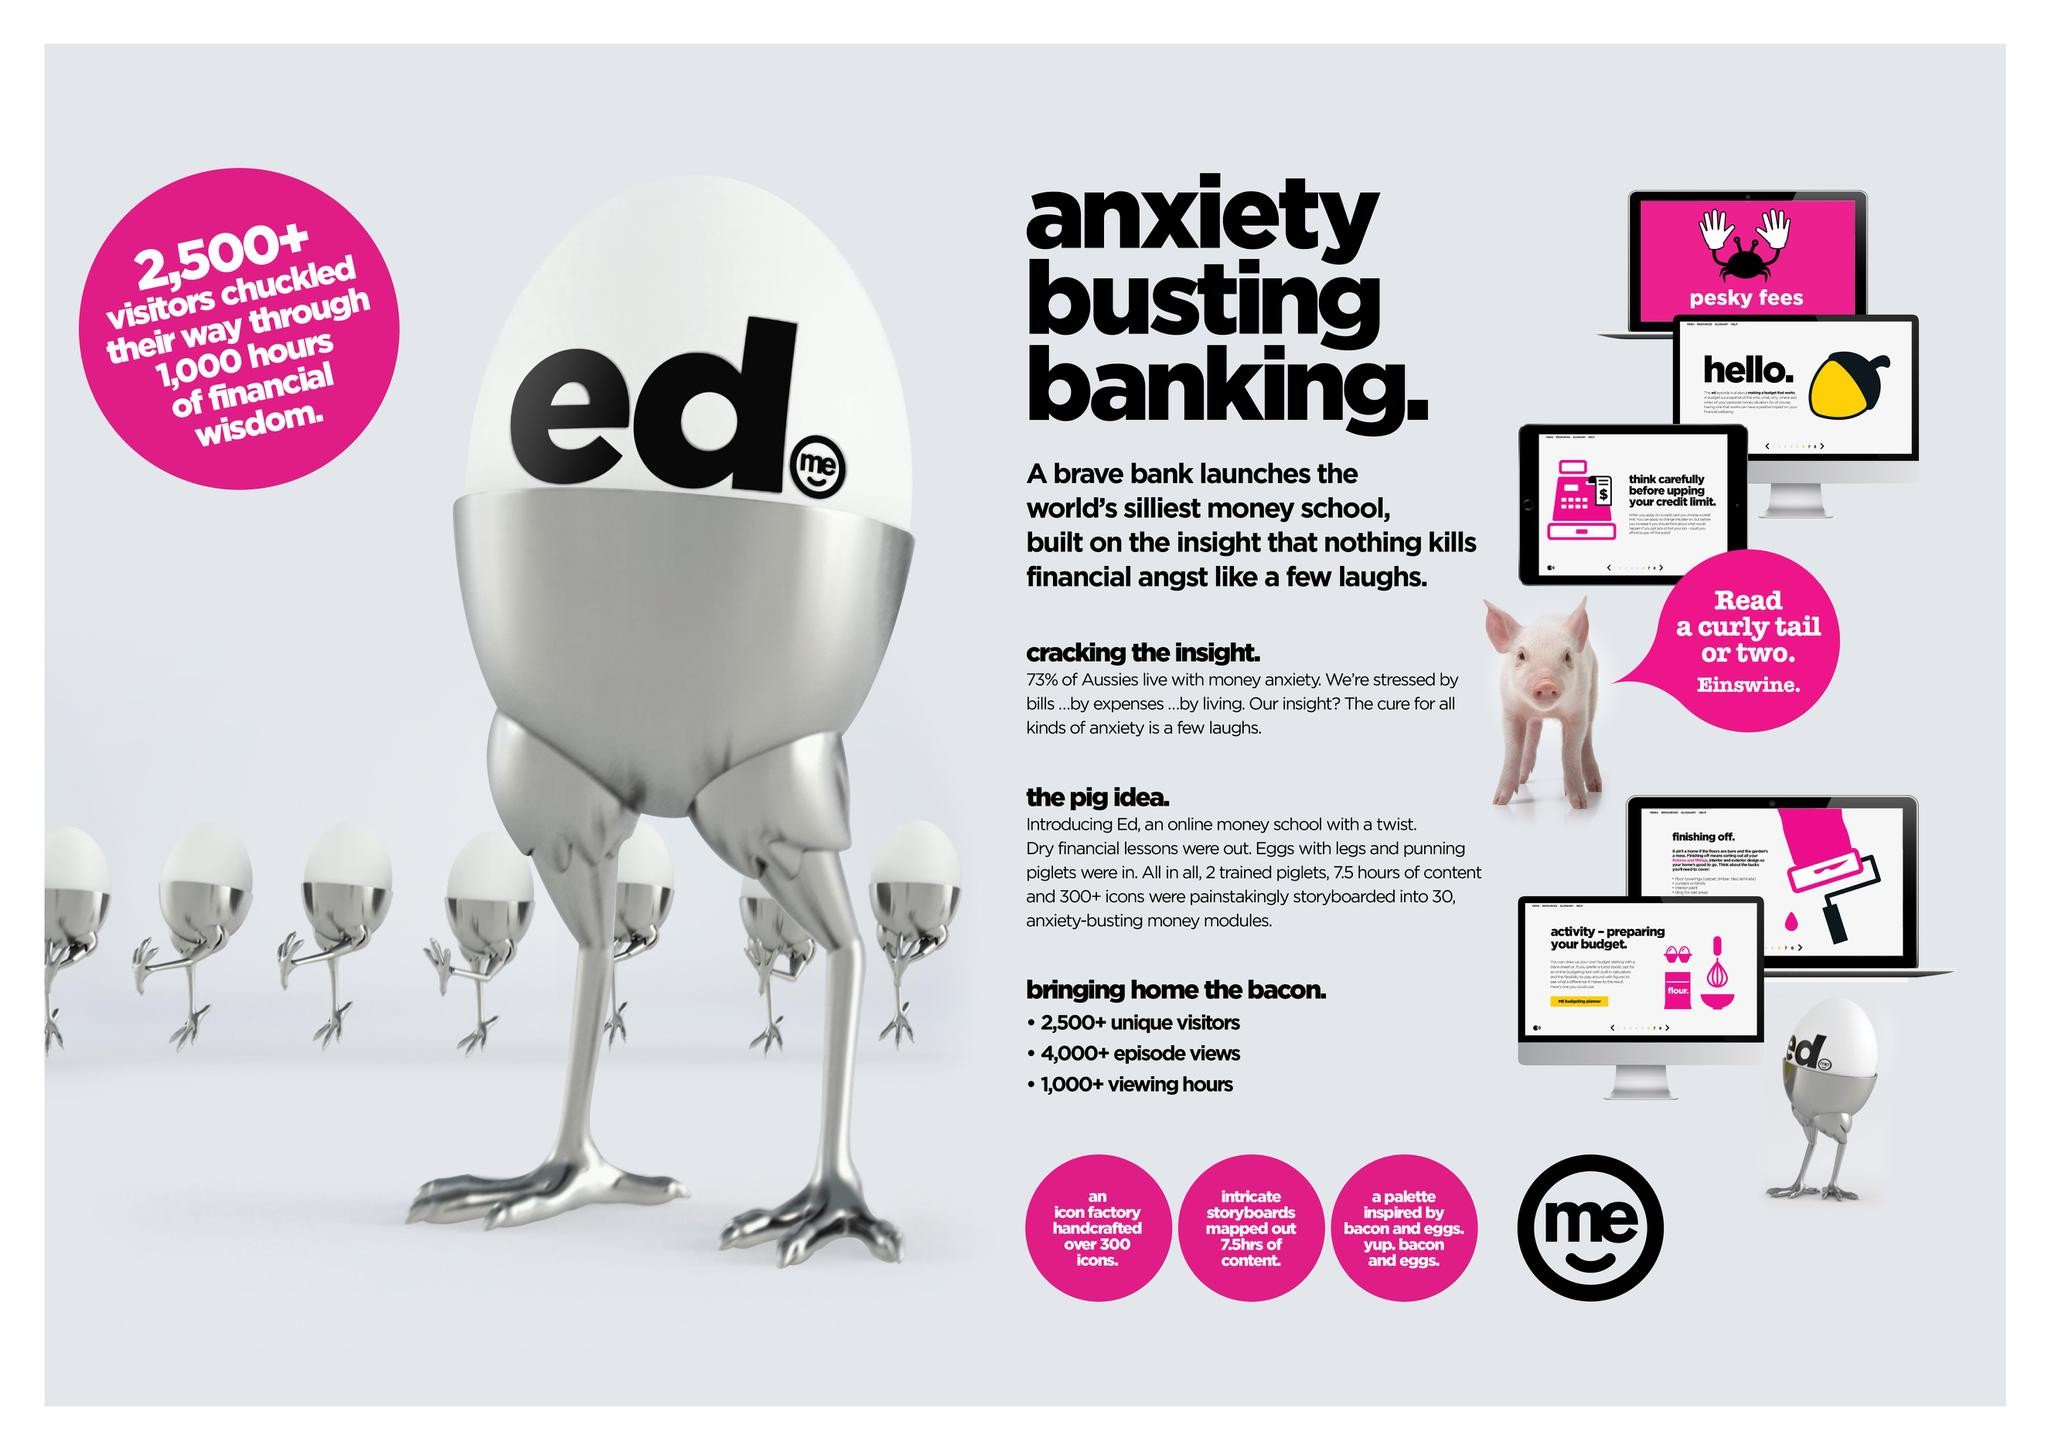 Ed: Anxiety-busting banking